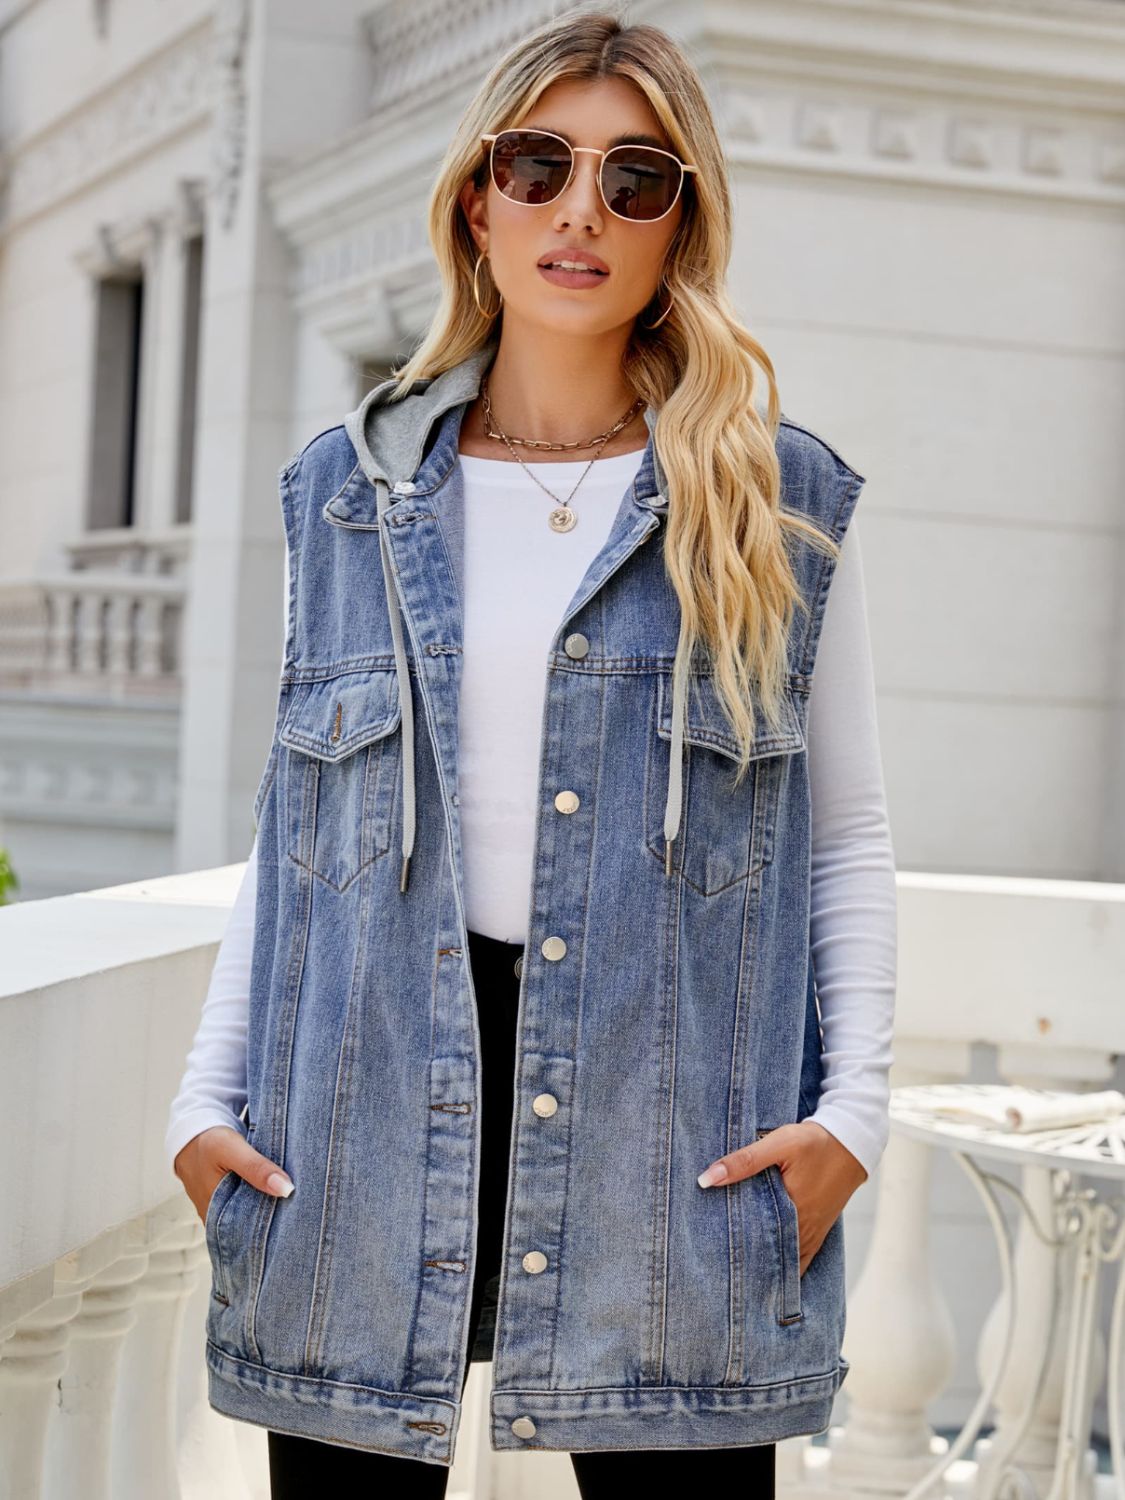 Blue Denim Matching Set Back Sleeveless Crop Top And Mini Skirt Suit For  Women Sexy Summer Outfit OL V200325 From Huang01, $16.26 | DHgate.Com